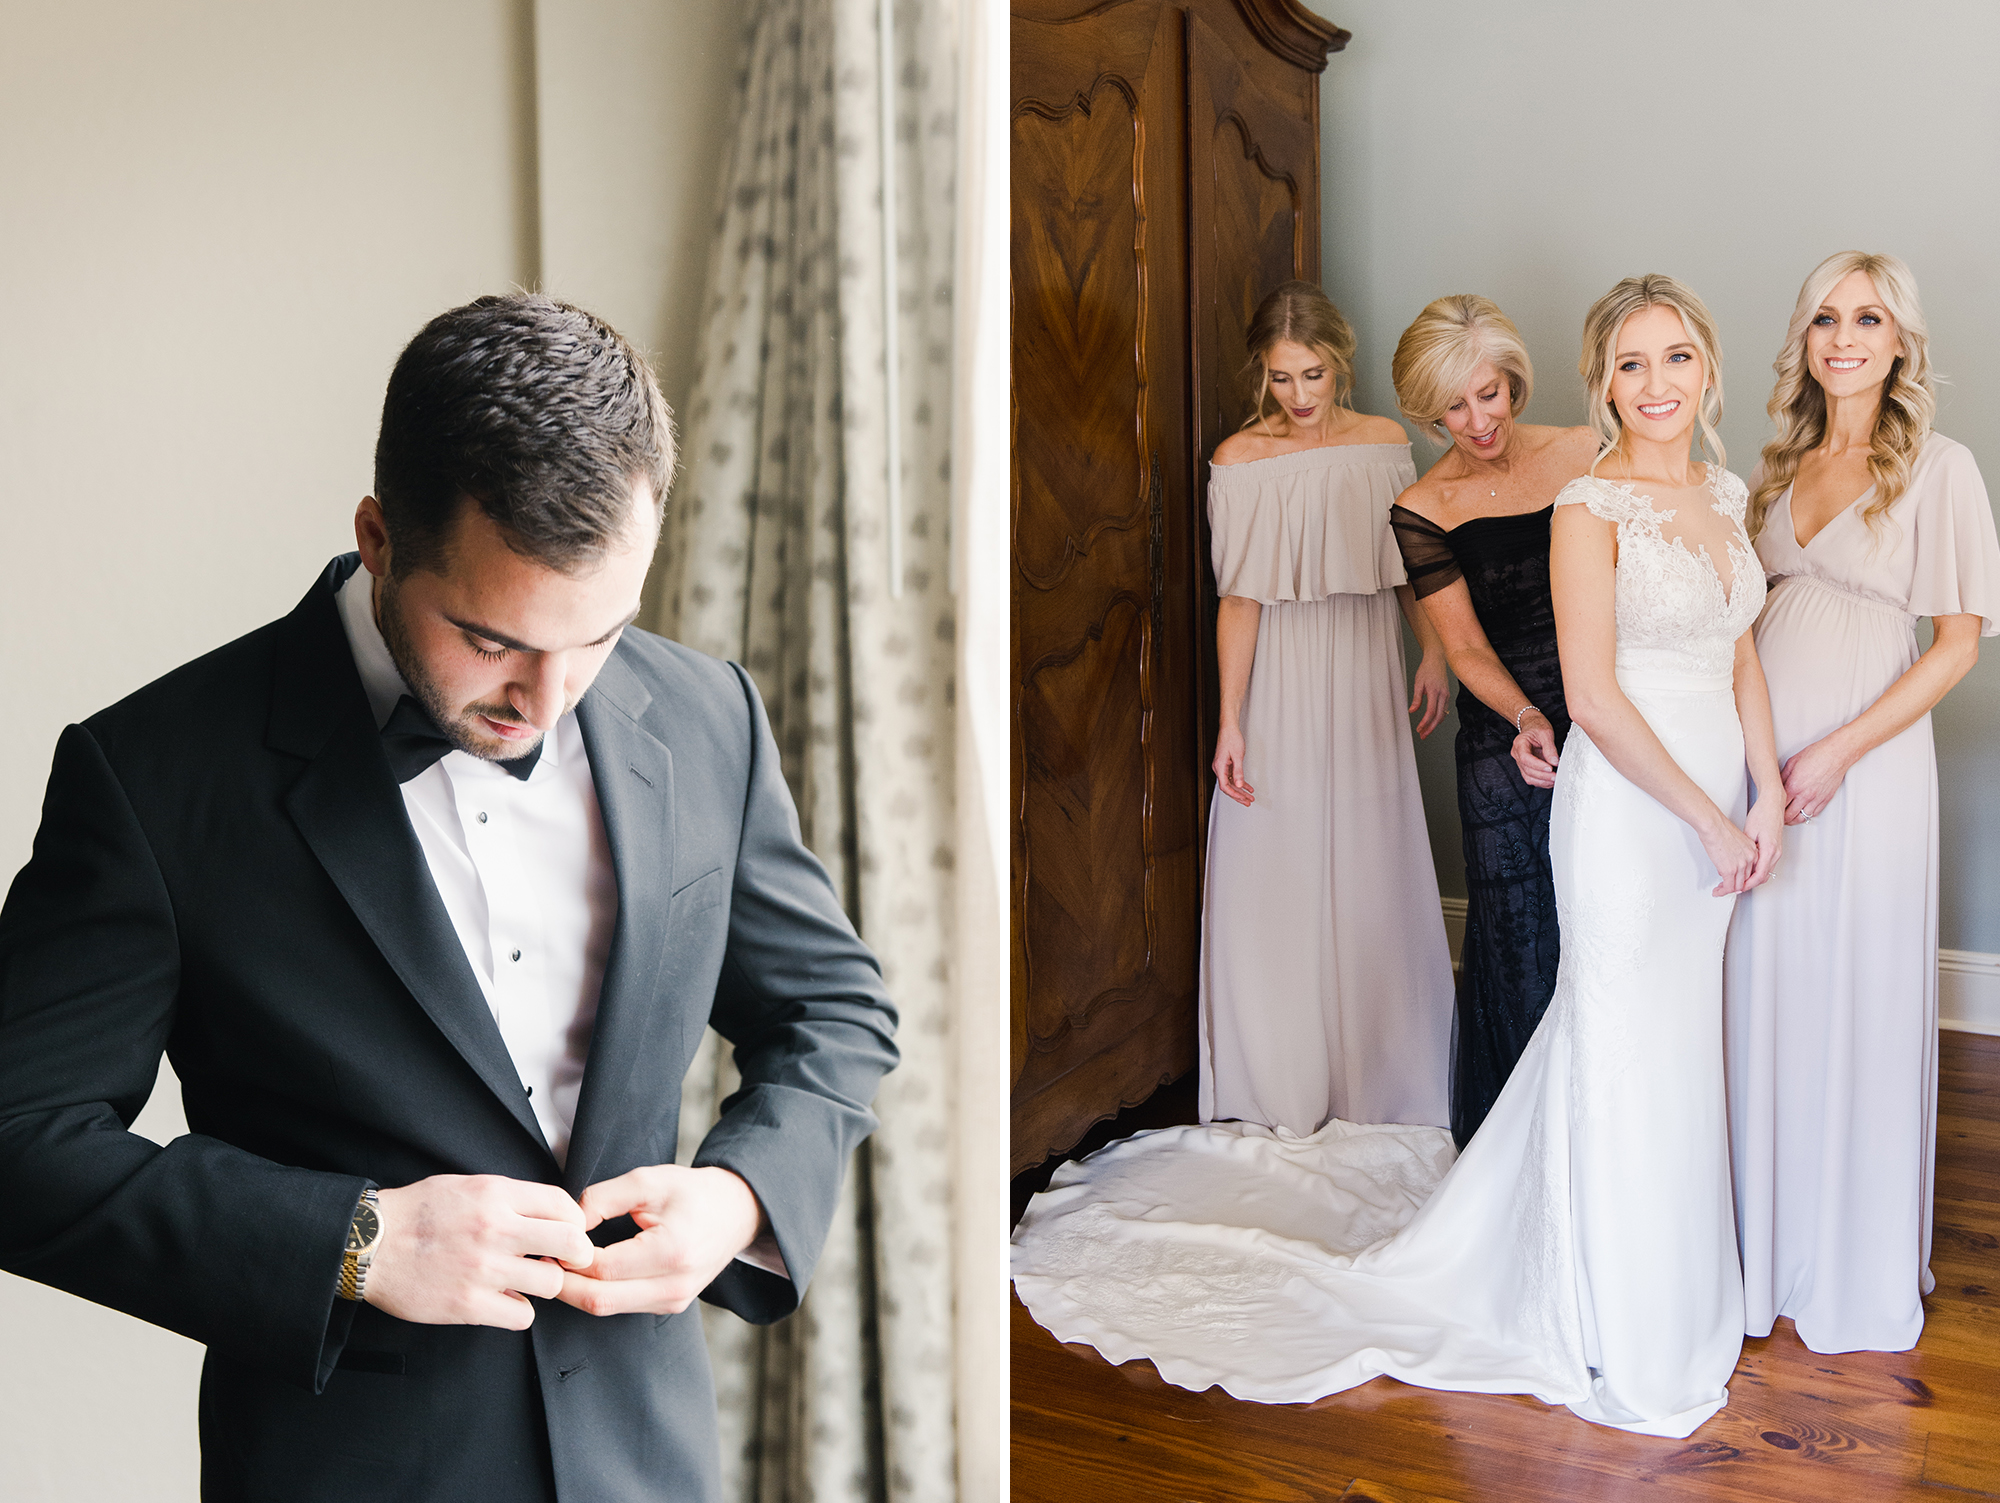 groom buttoning suit; bride getting into wedding dress with mother and bridesmaids